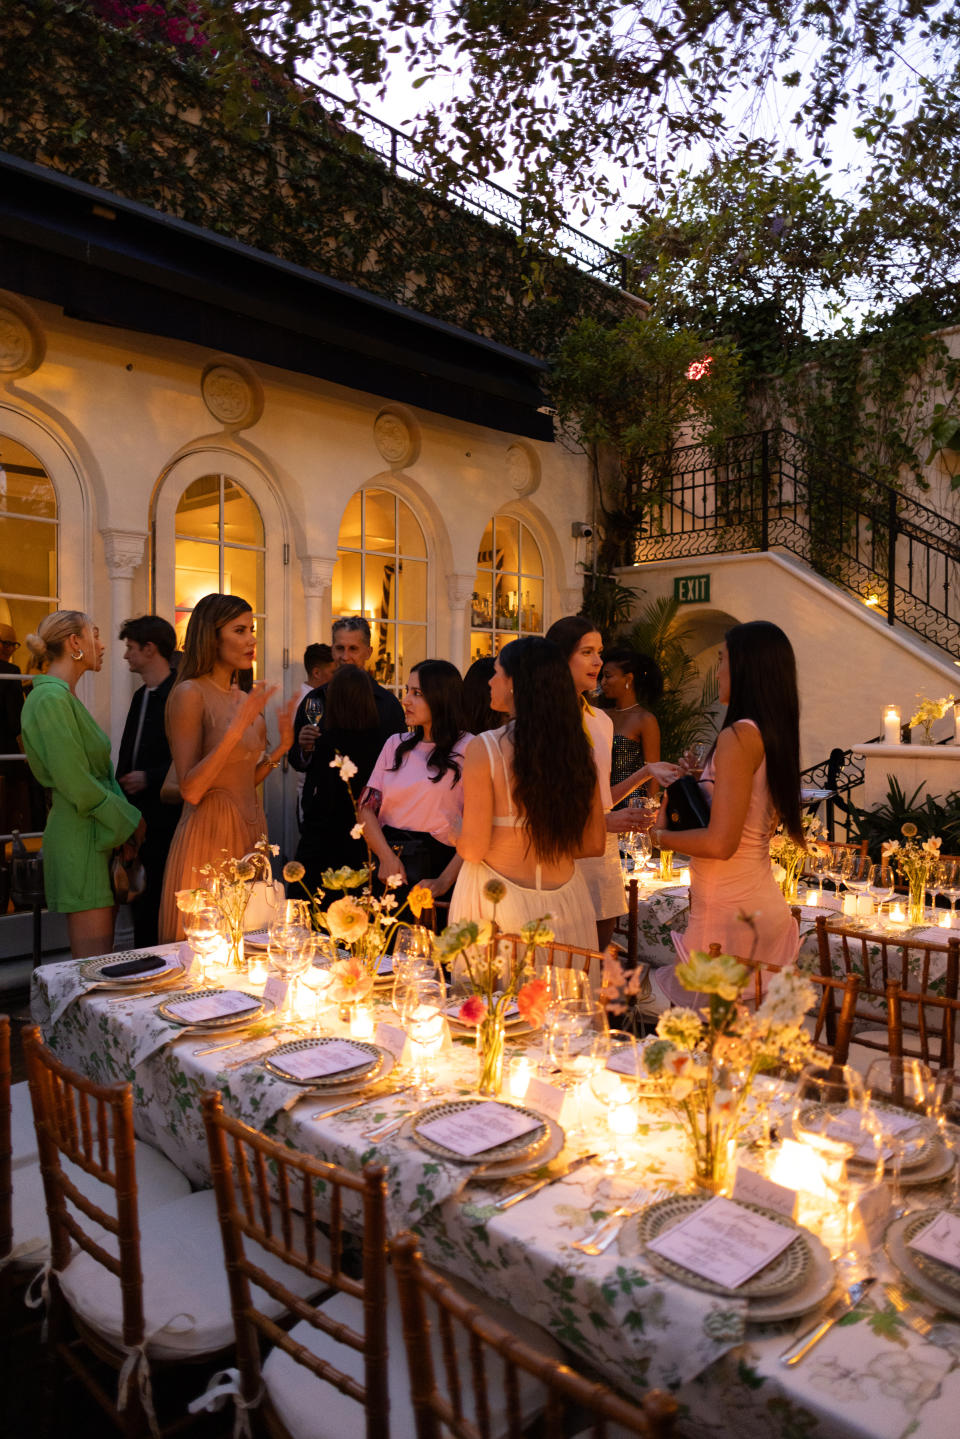 A look at Tory Burch’s celebration dinner at Casa Tua.